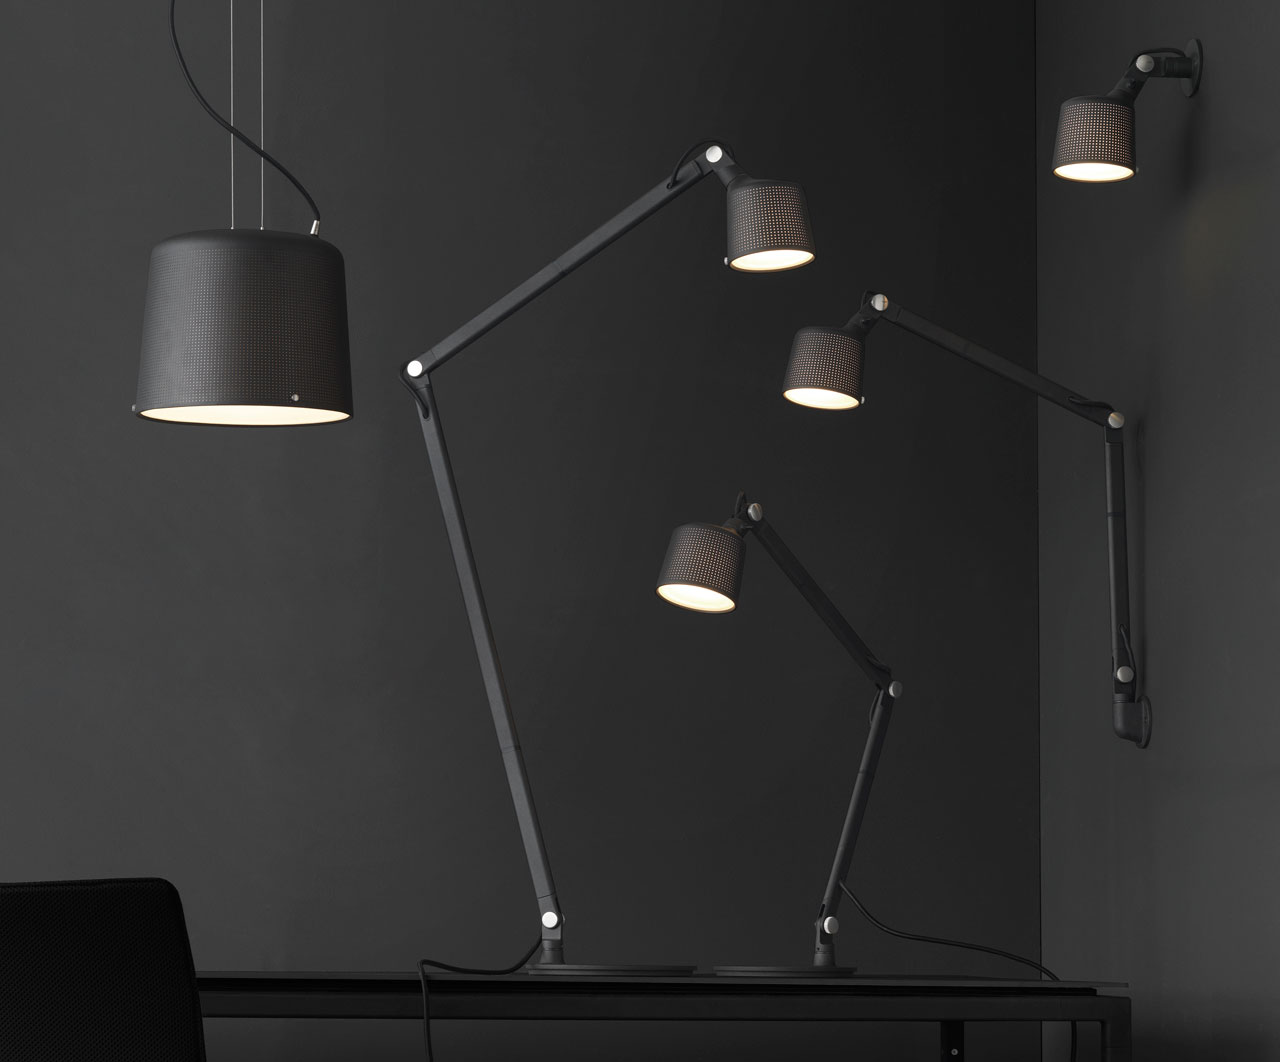 A Look at Vipp's Collection of Timeless Lighting